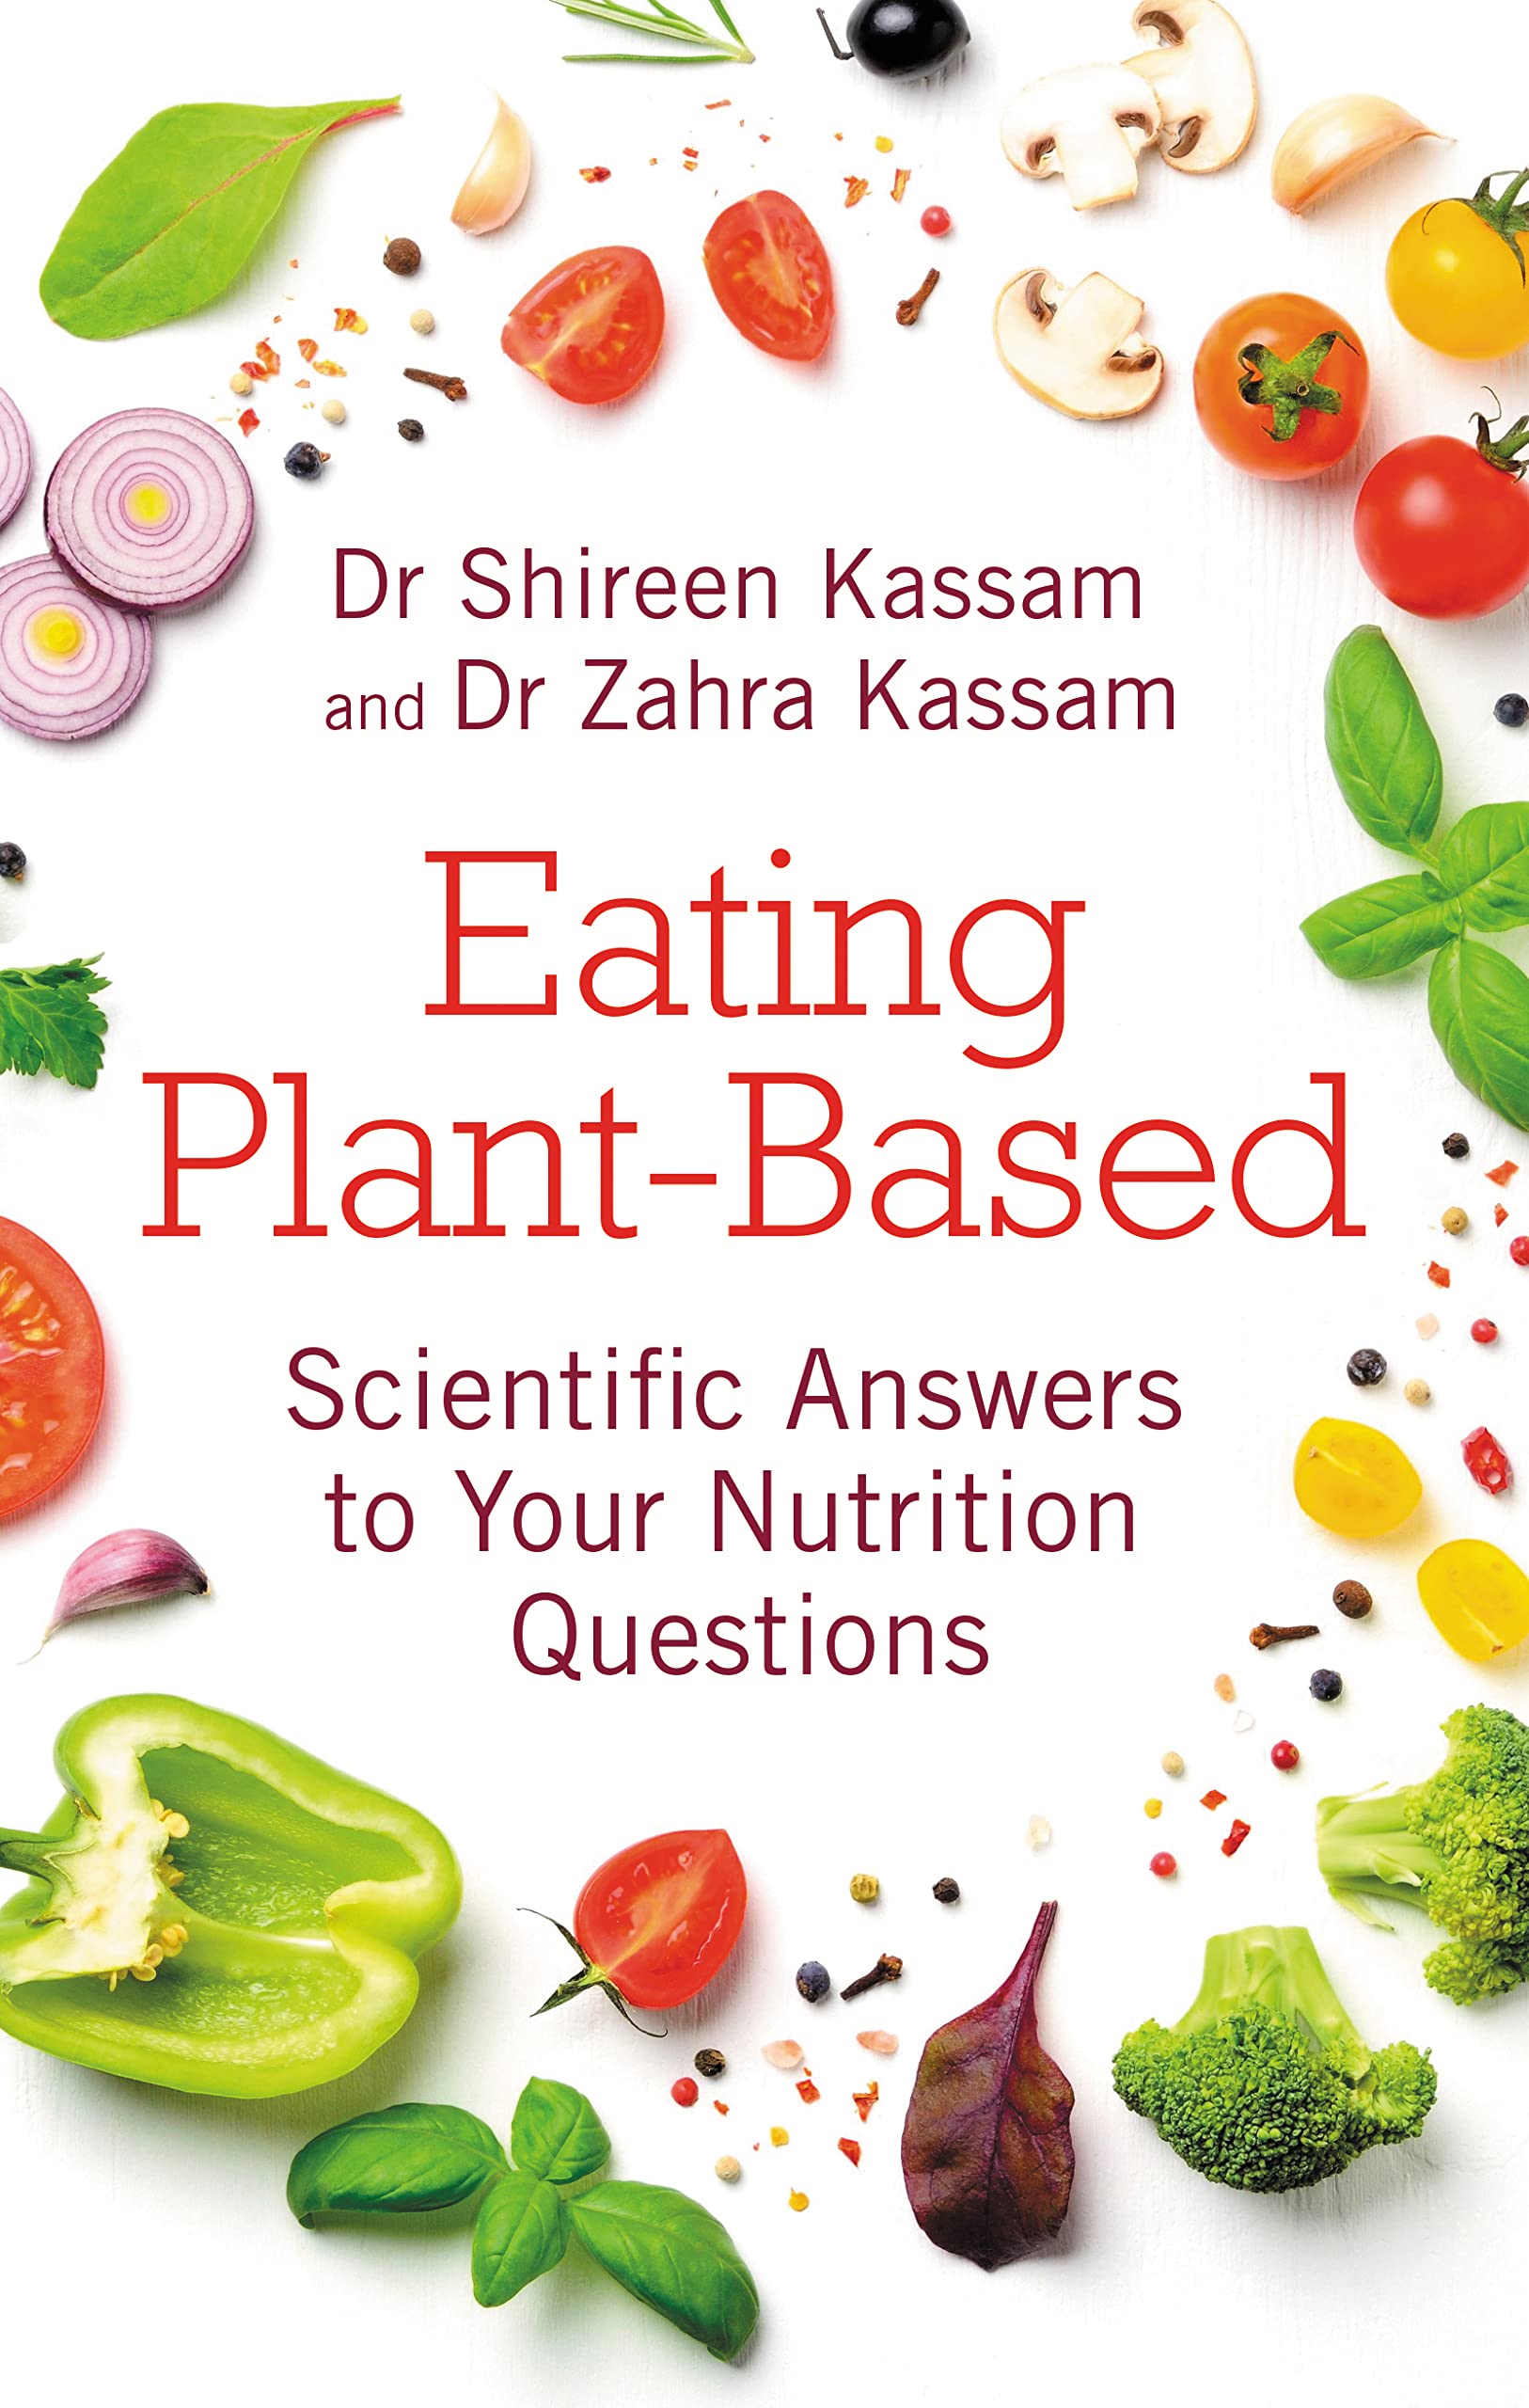 Eating Plant-Based: Scientific Answers to Your Nutrition Questions - SureShot Books Publishing LLC